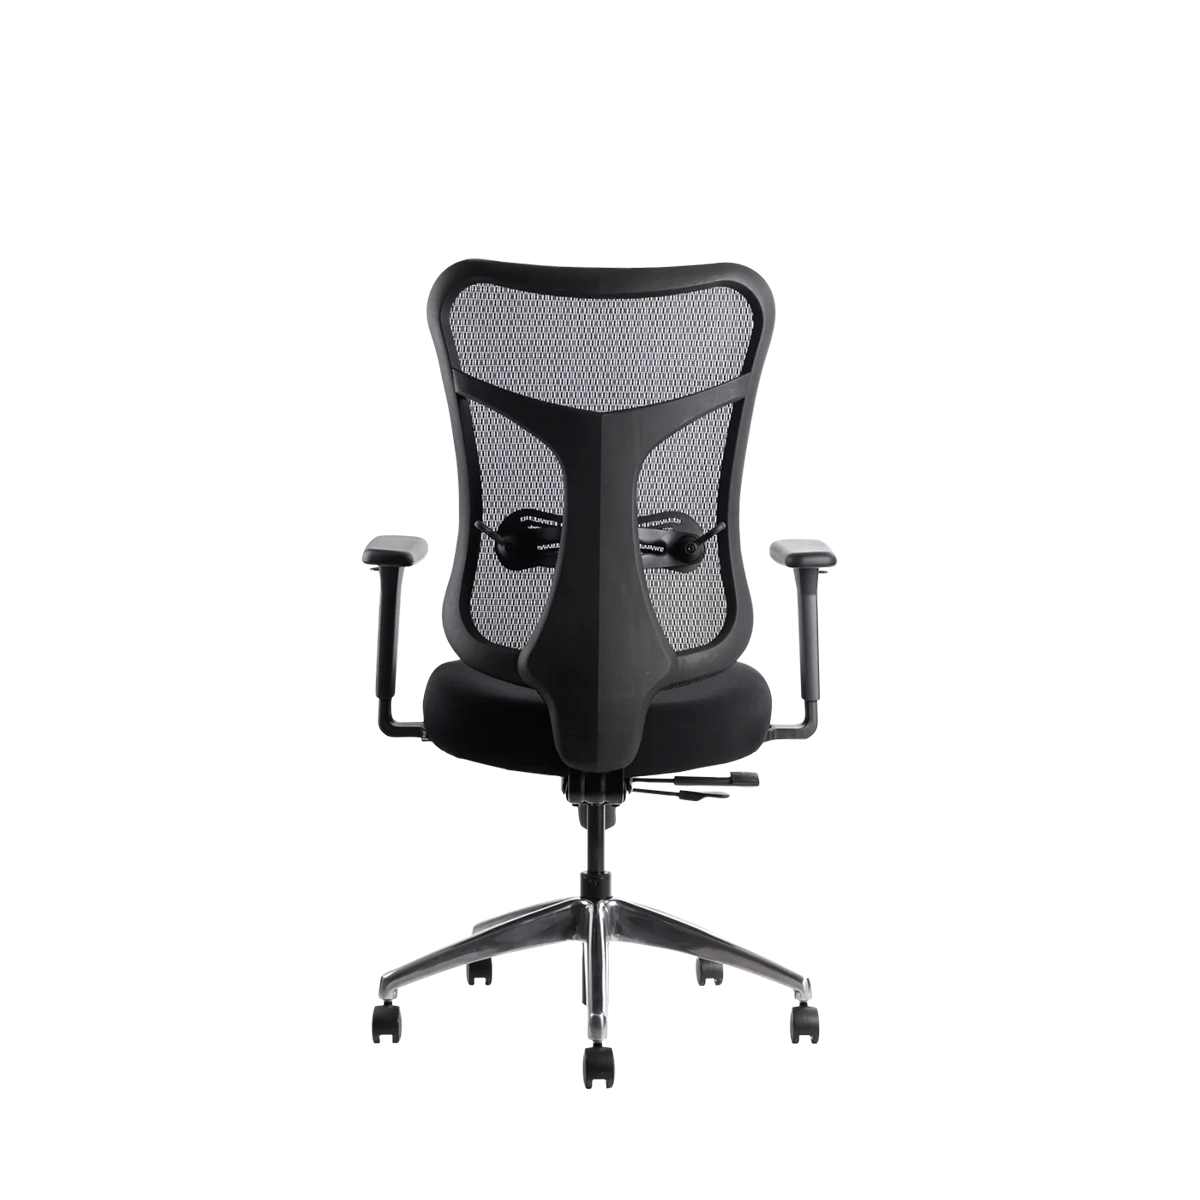 Kabuto - Office chair by Zoowork